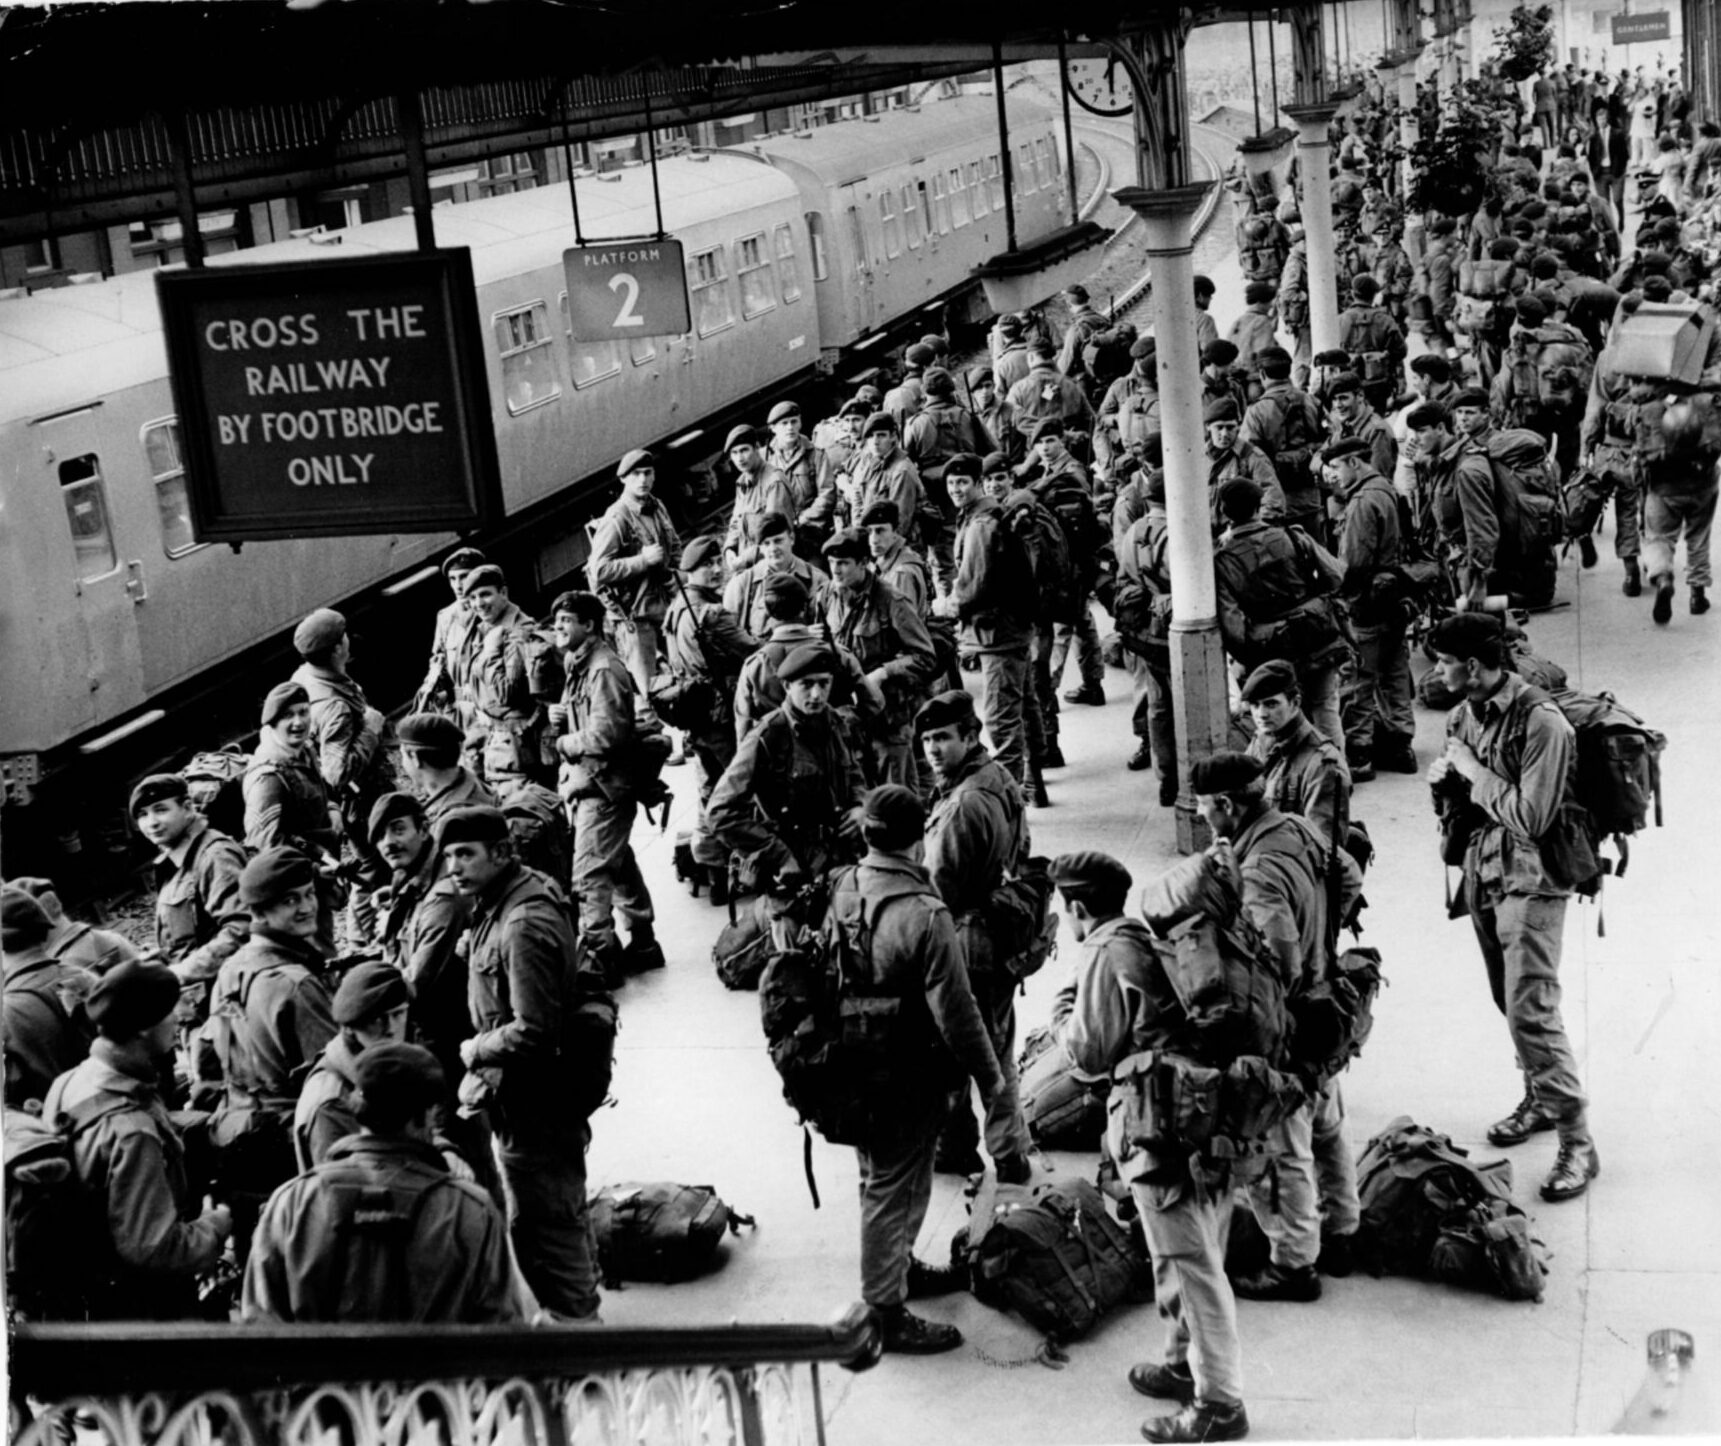 Marines from RM Condor at Arbroath station in 1971.